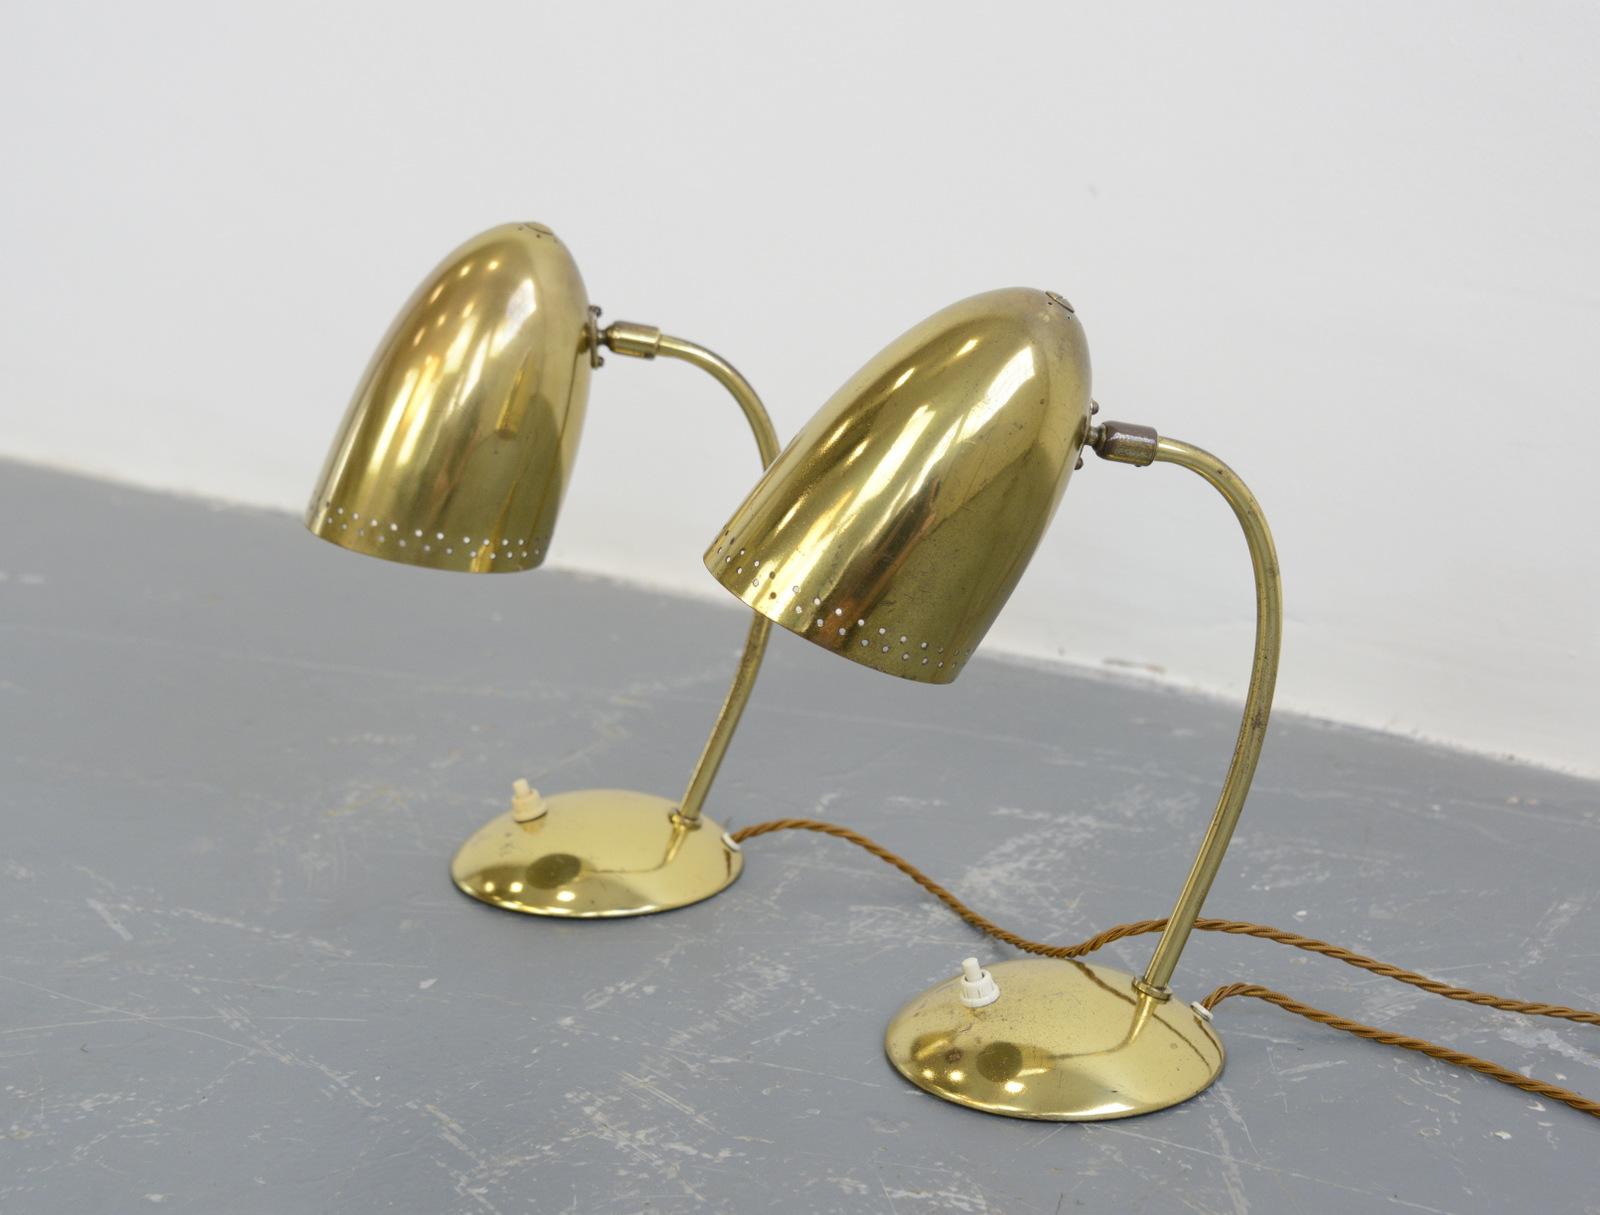 Model 4007 table lamps by Christian Dell for Kaiser Idell, circa 1930s

- Price is per lamp
- Solid brass shade
- Articulated head on a small ball and socket joint
- On/Off switch on the base
- Takes E27 fitting bulbs
- Designed by Christian